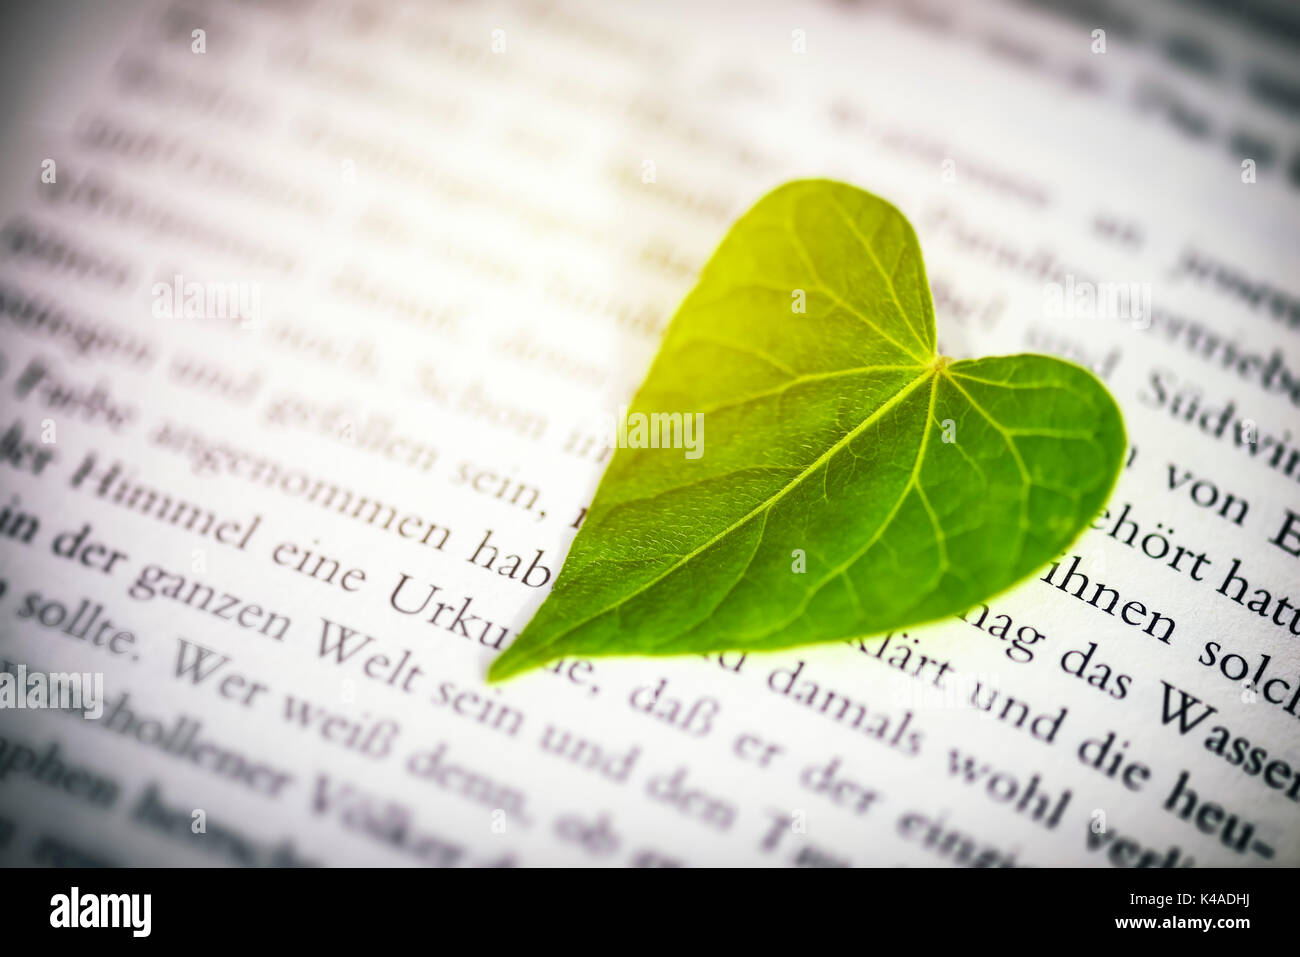 Heart-Shaped Leaf In A Book Stock Photo - Alamy